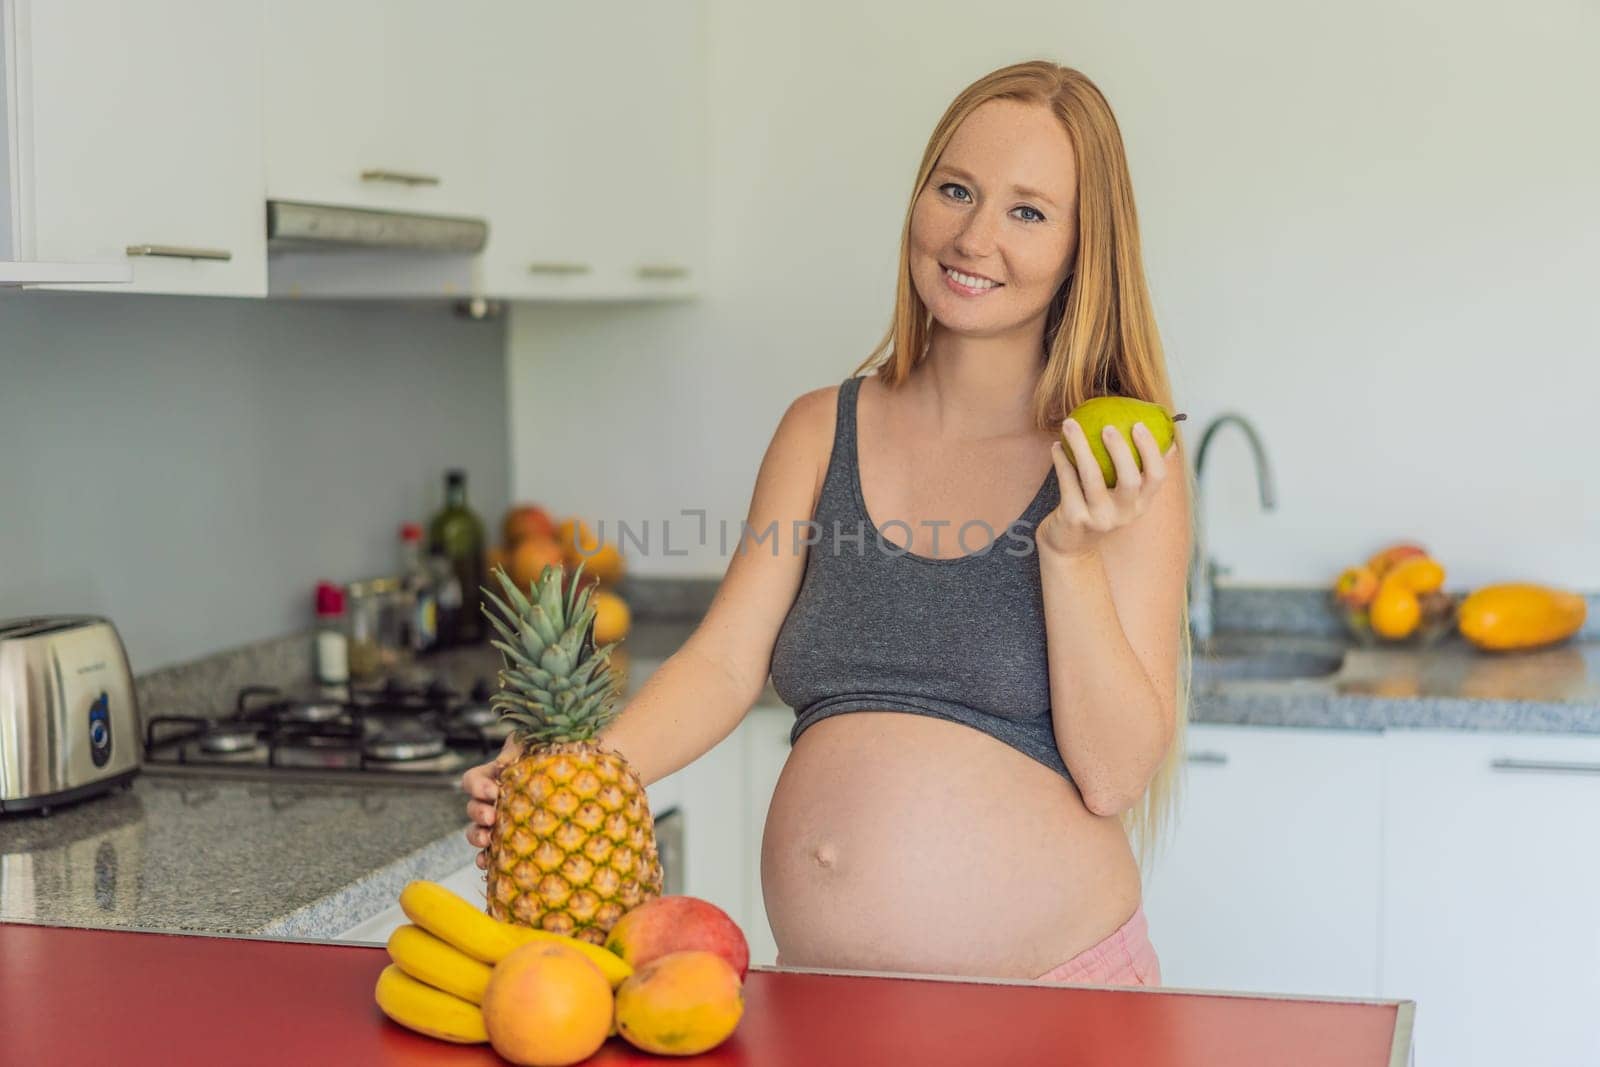 Embracing a healthy choice, a pregnant woman prepares to enjoy a nutritious moment, gearing up to eat fresh fruit and nourish herself during her pregnancy.